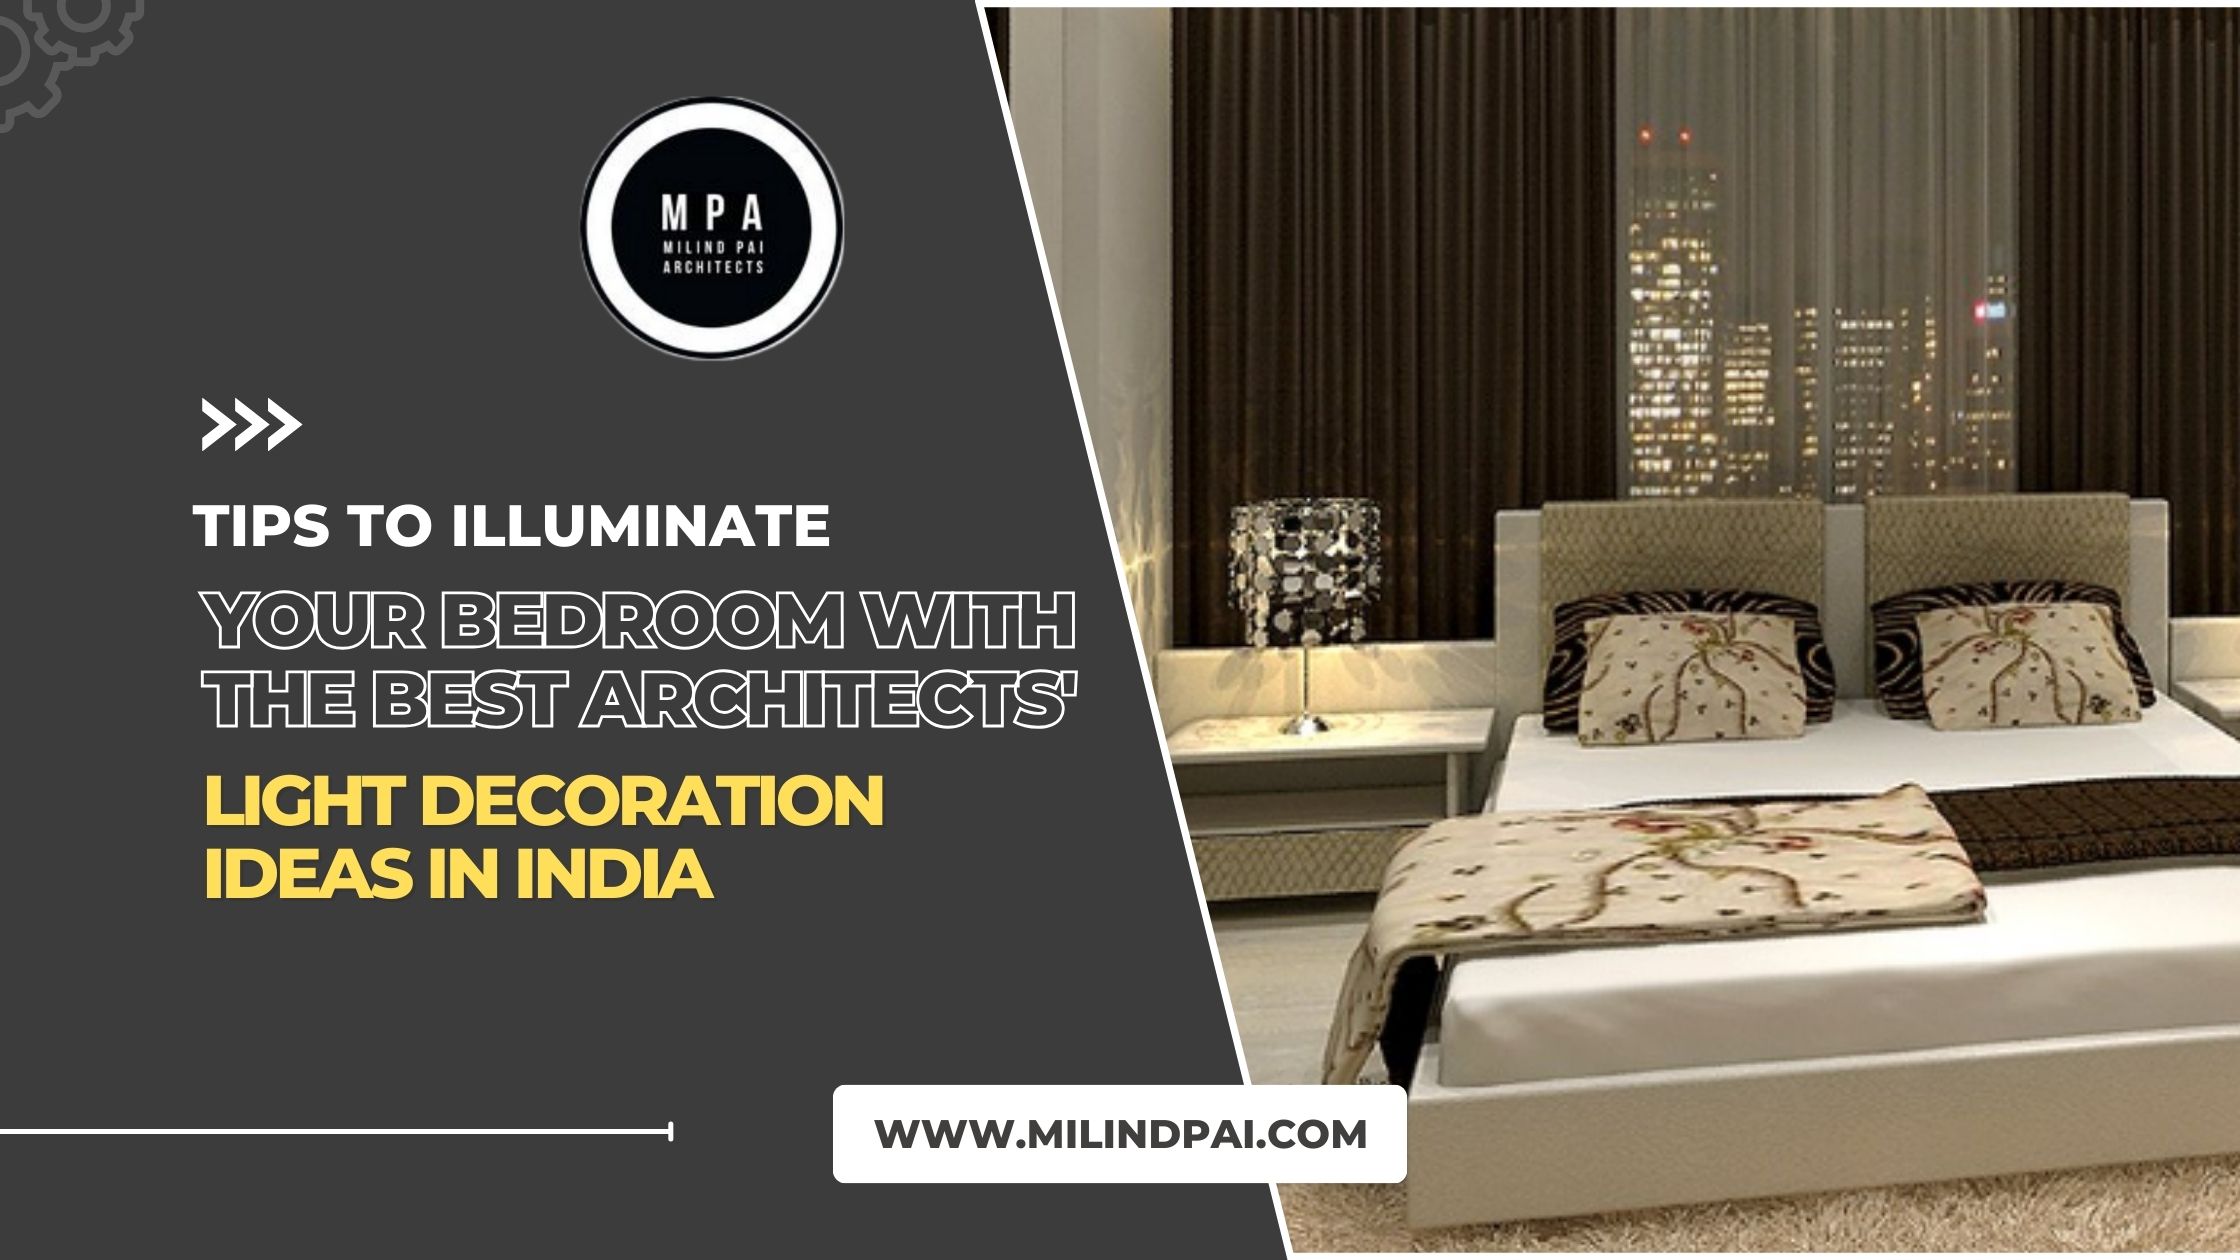 Tips to Illuminate Your Bedroom with Decoration Ideas